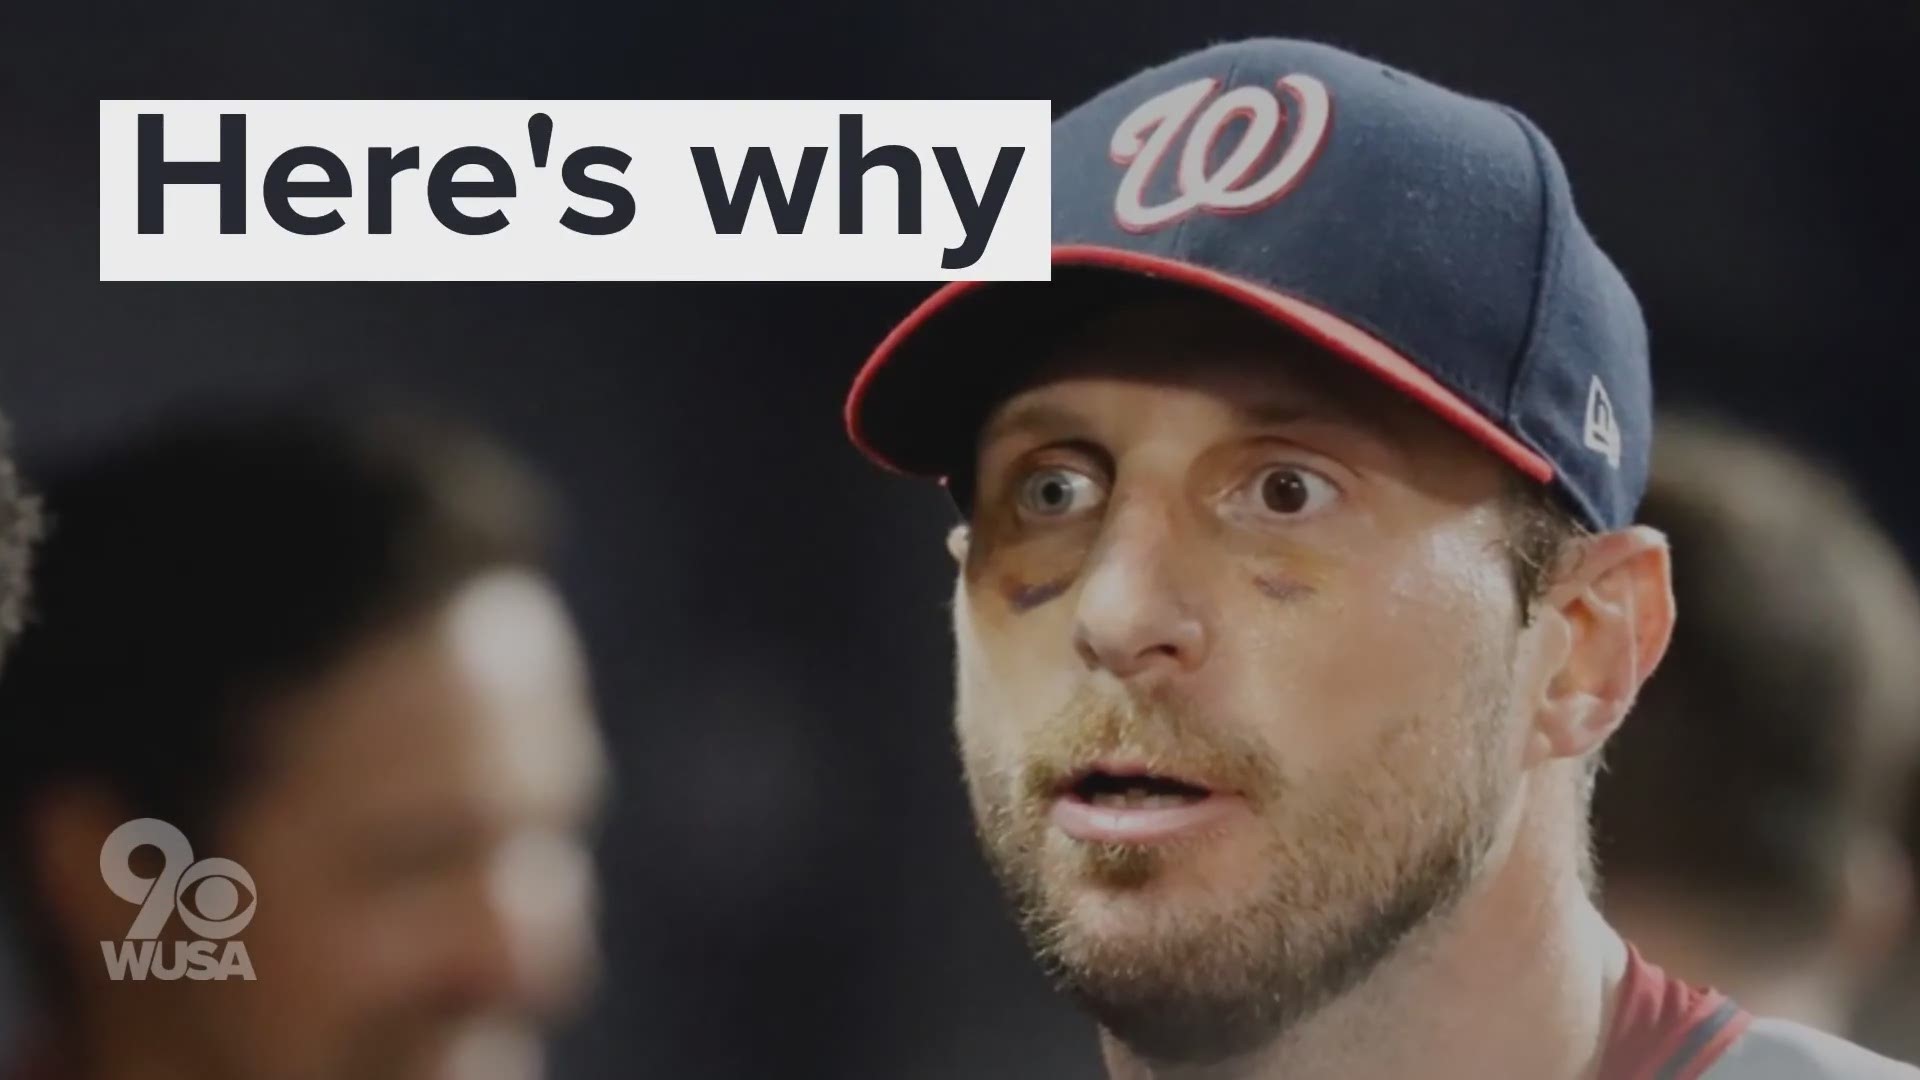 The Nationals starting pitcher has a condition known as heterochromia iridis.